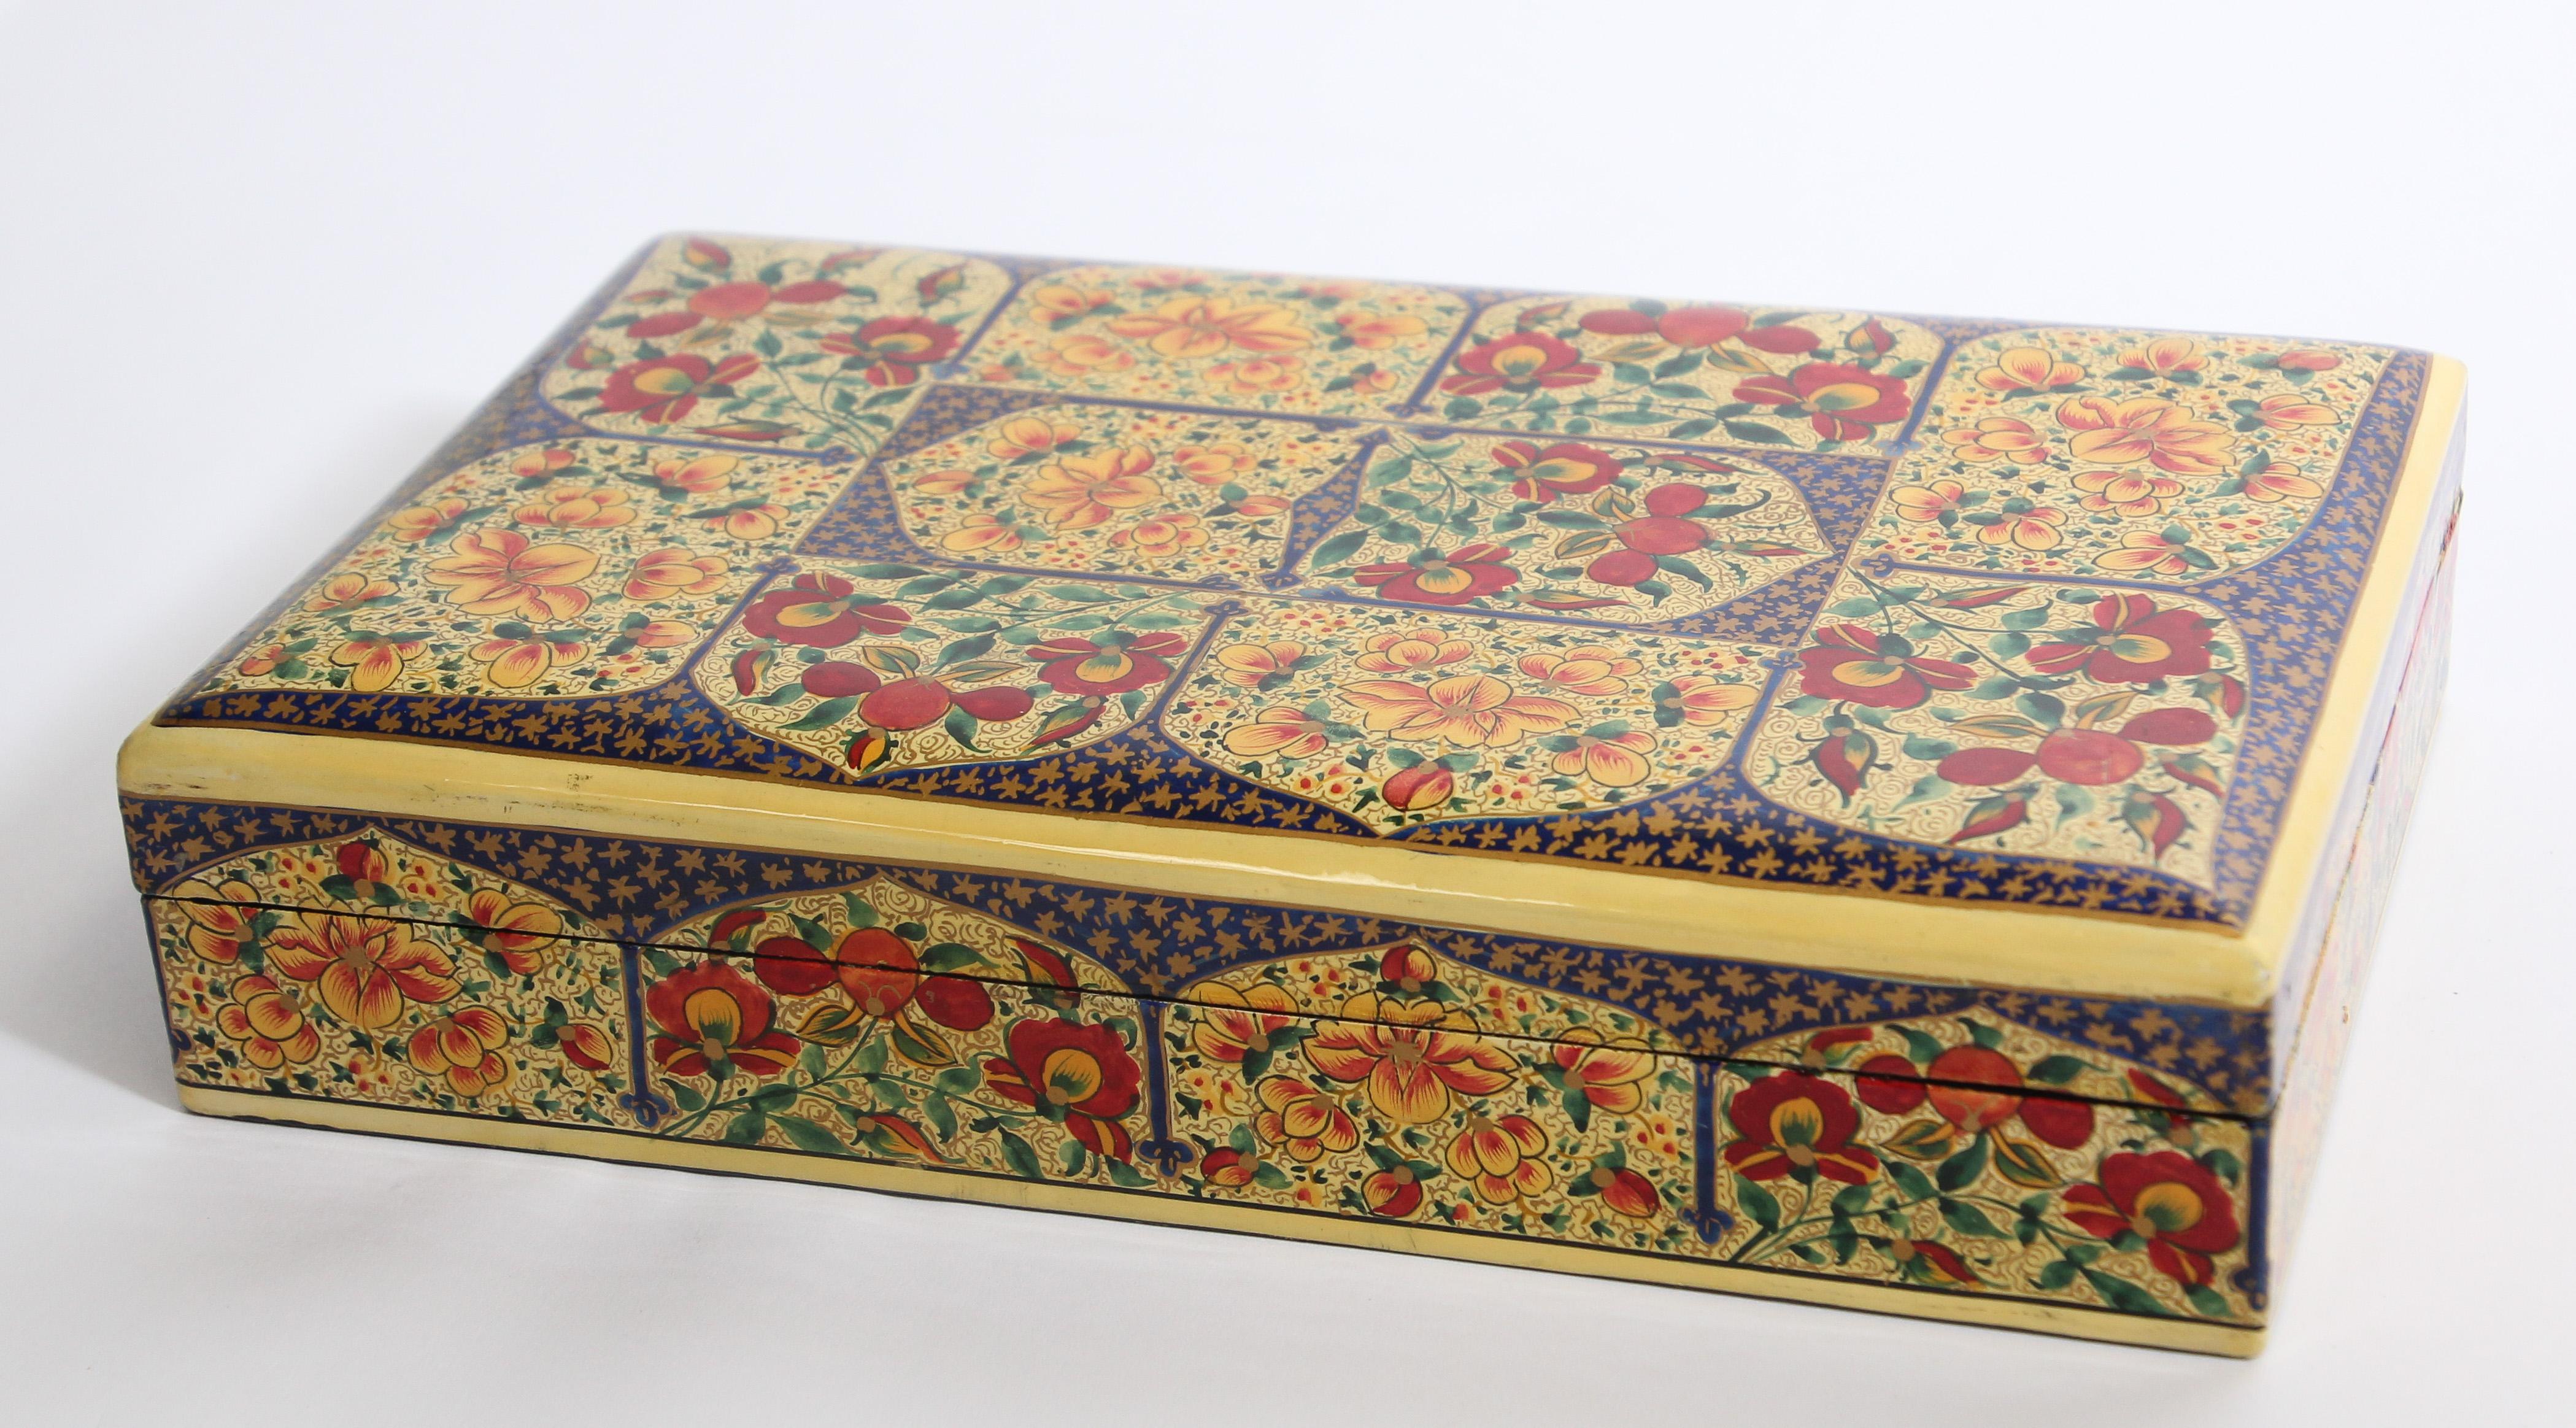 Hand Painted Rajasthani Lacquer Decorative Box For Sale 2